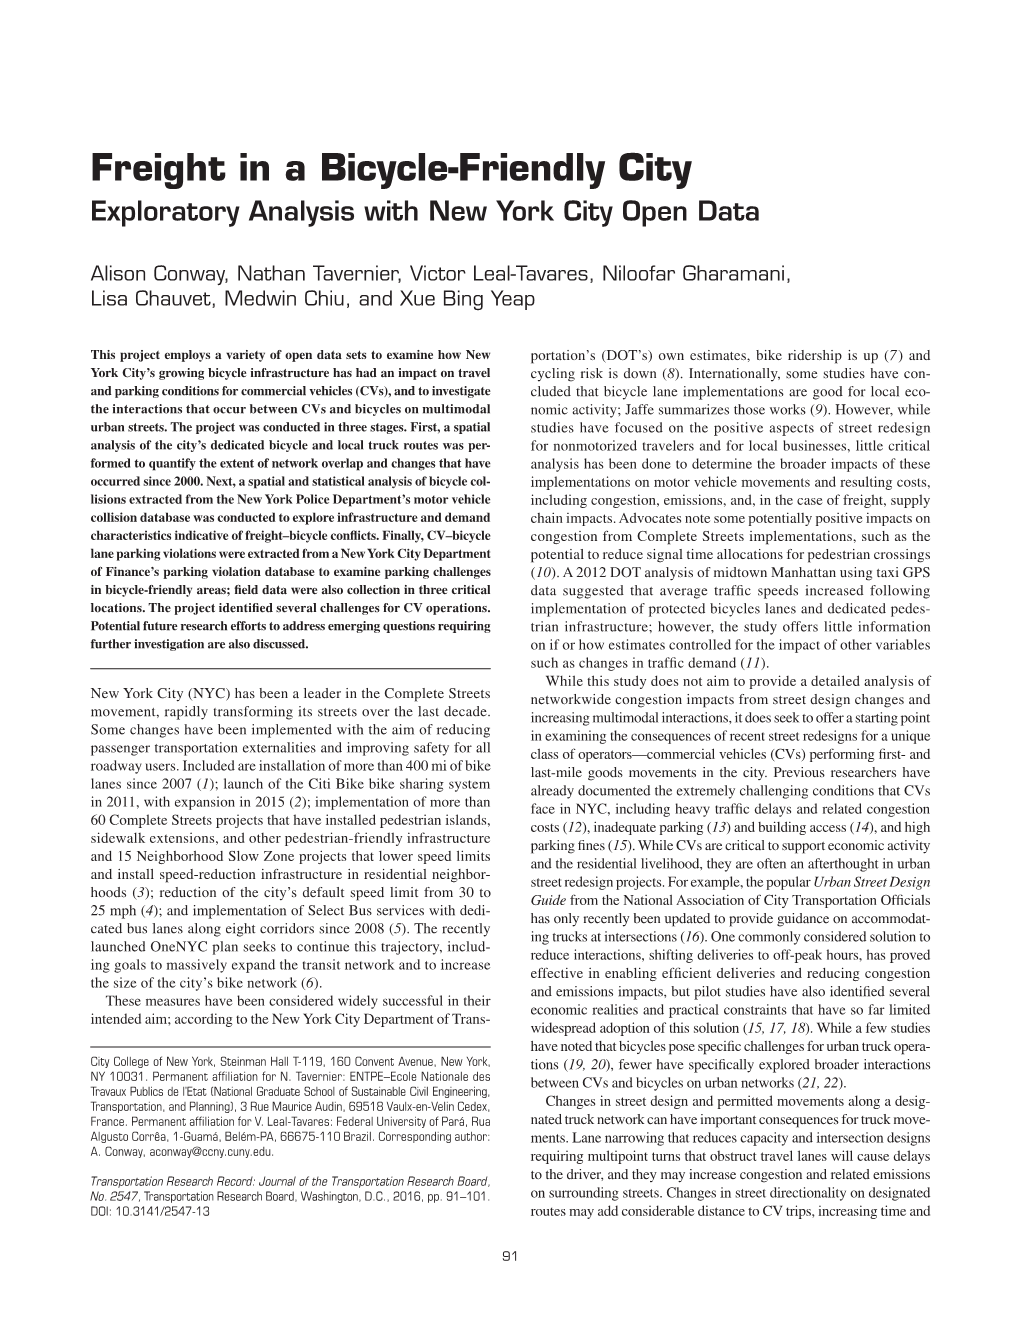 Freight in a Bicycle-Friendly City Exploratory Analysis with New York City Open Data